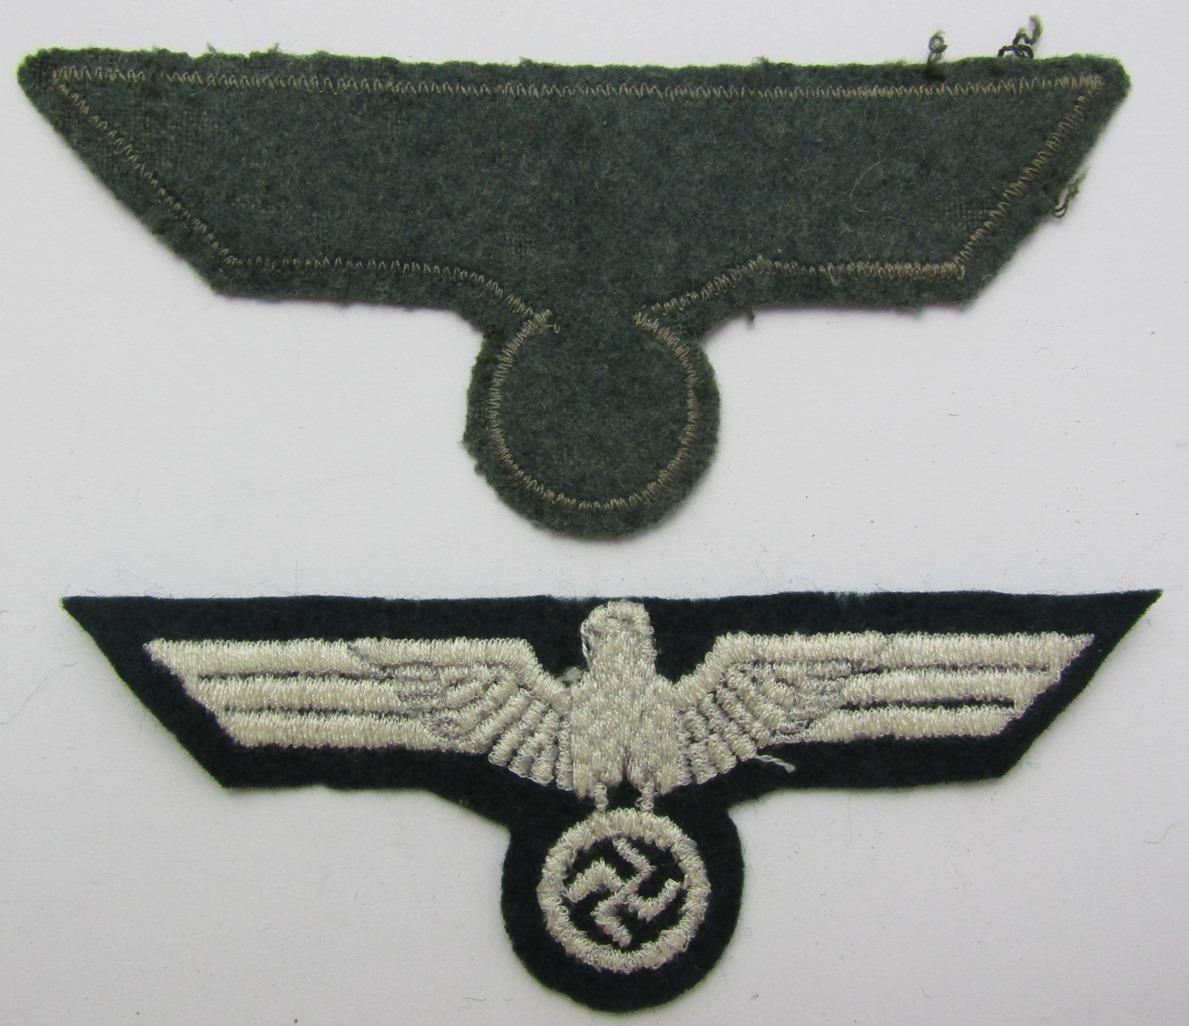 2pcs-WW2 Wehrmacht NCO And Enlisted Breast Eagles